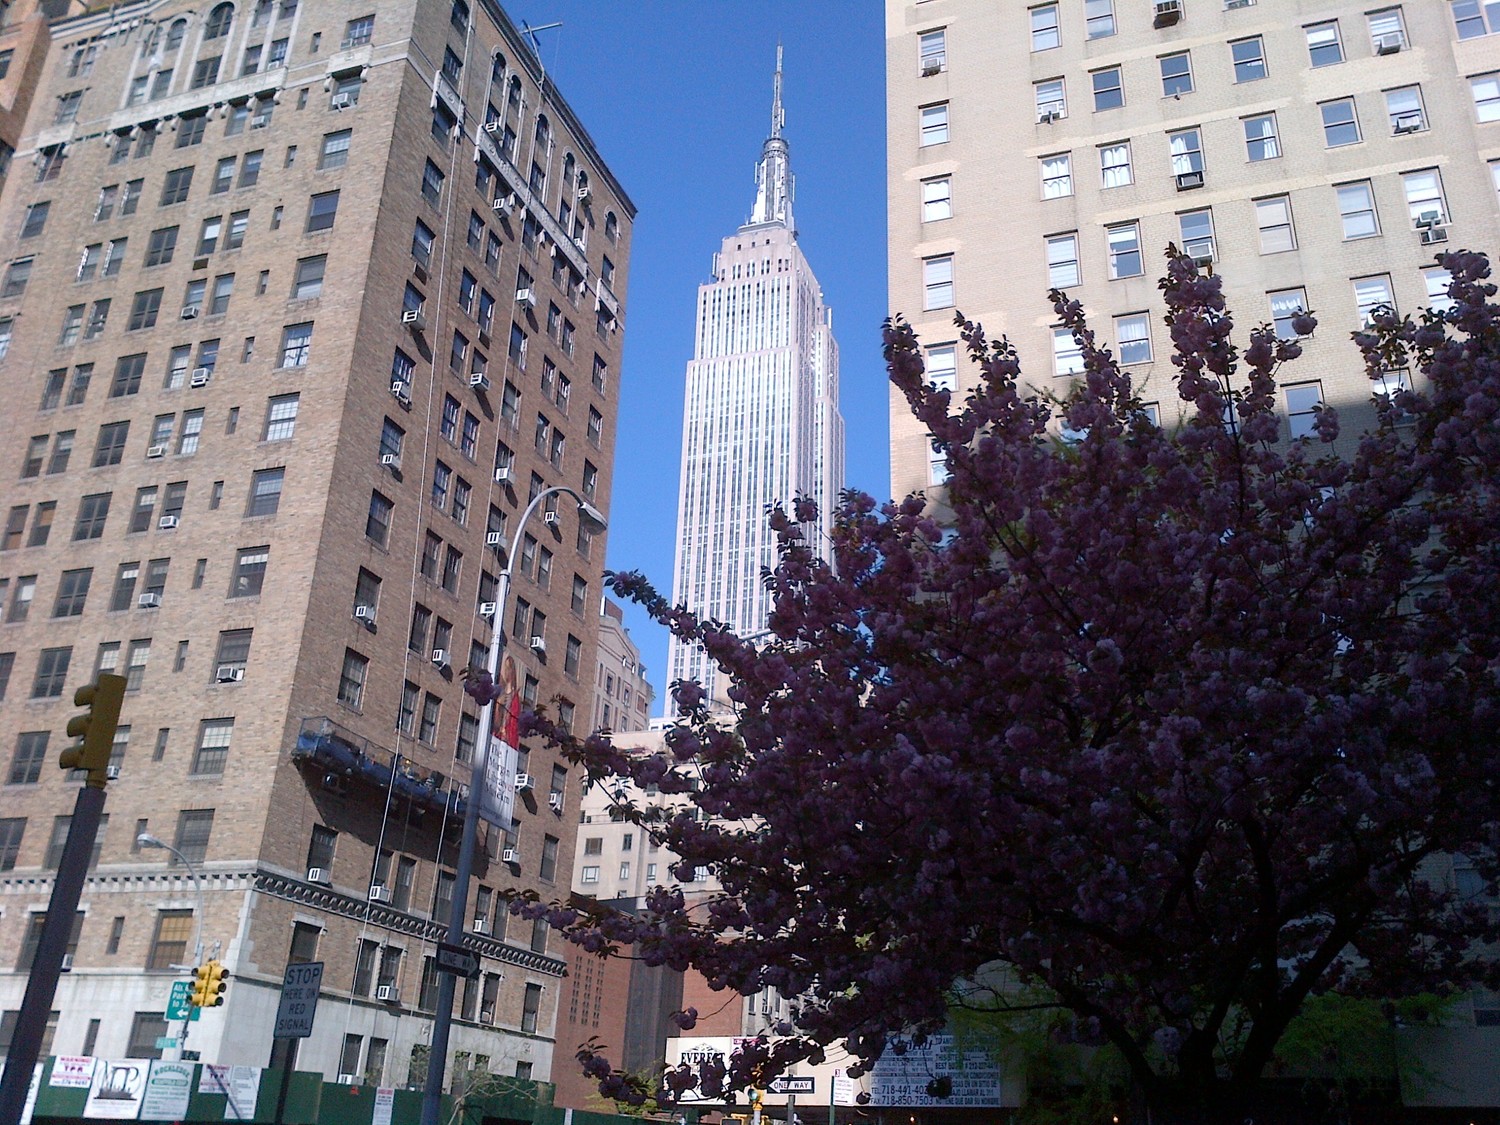 Gallery Photo of Near the PT Office in New York - Spring